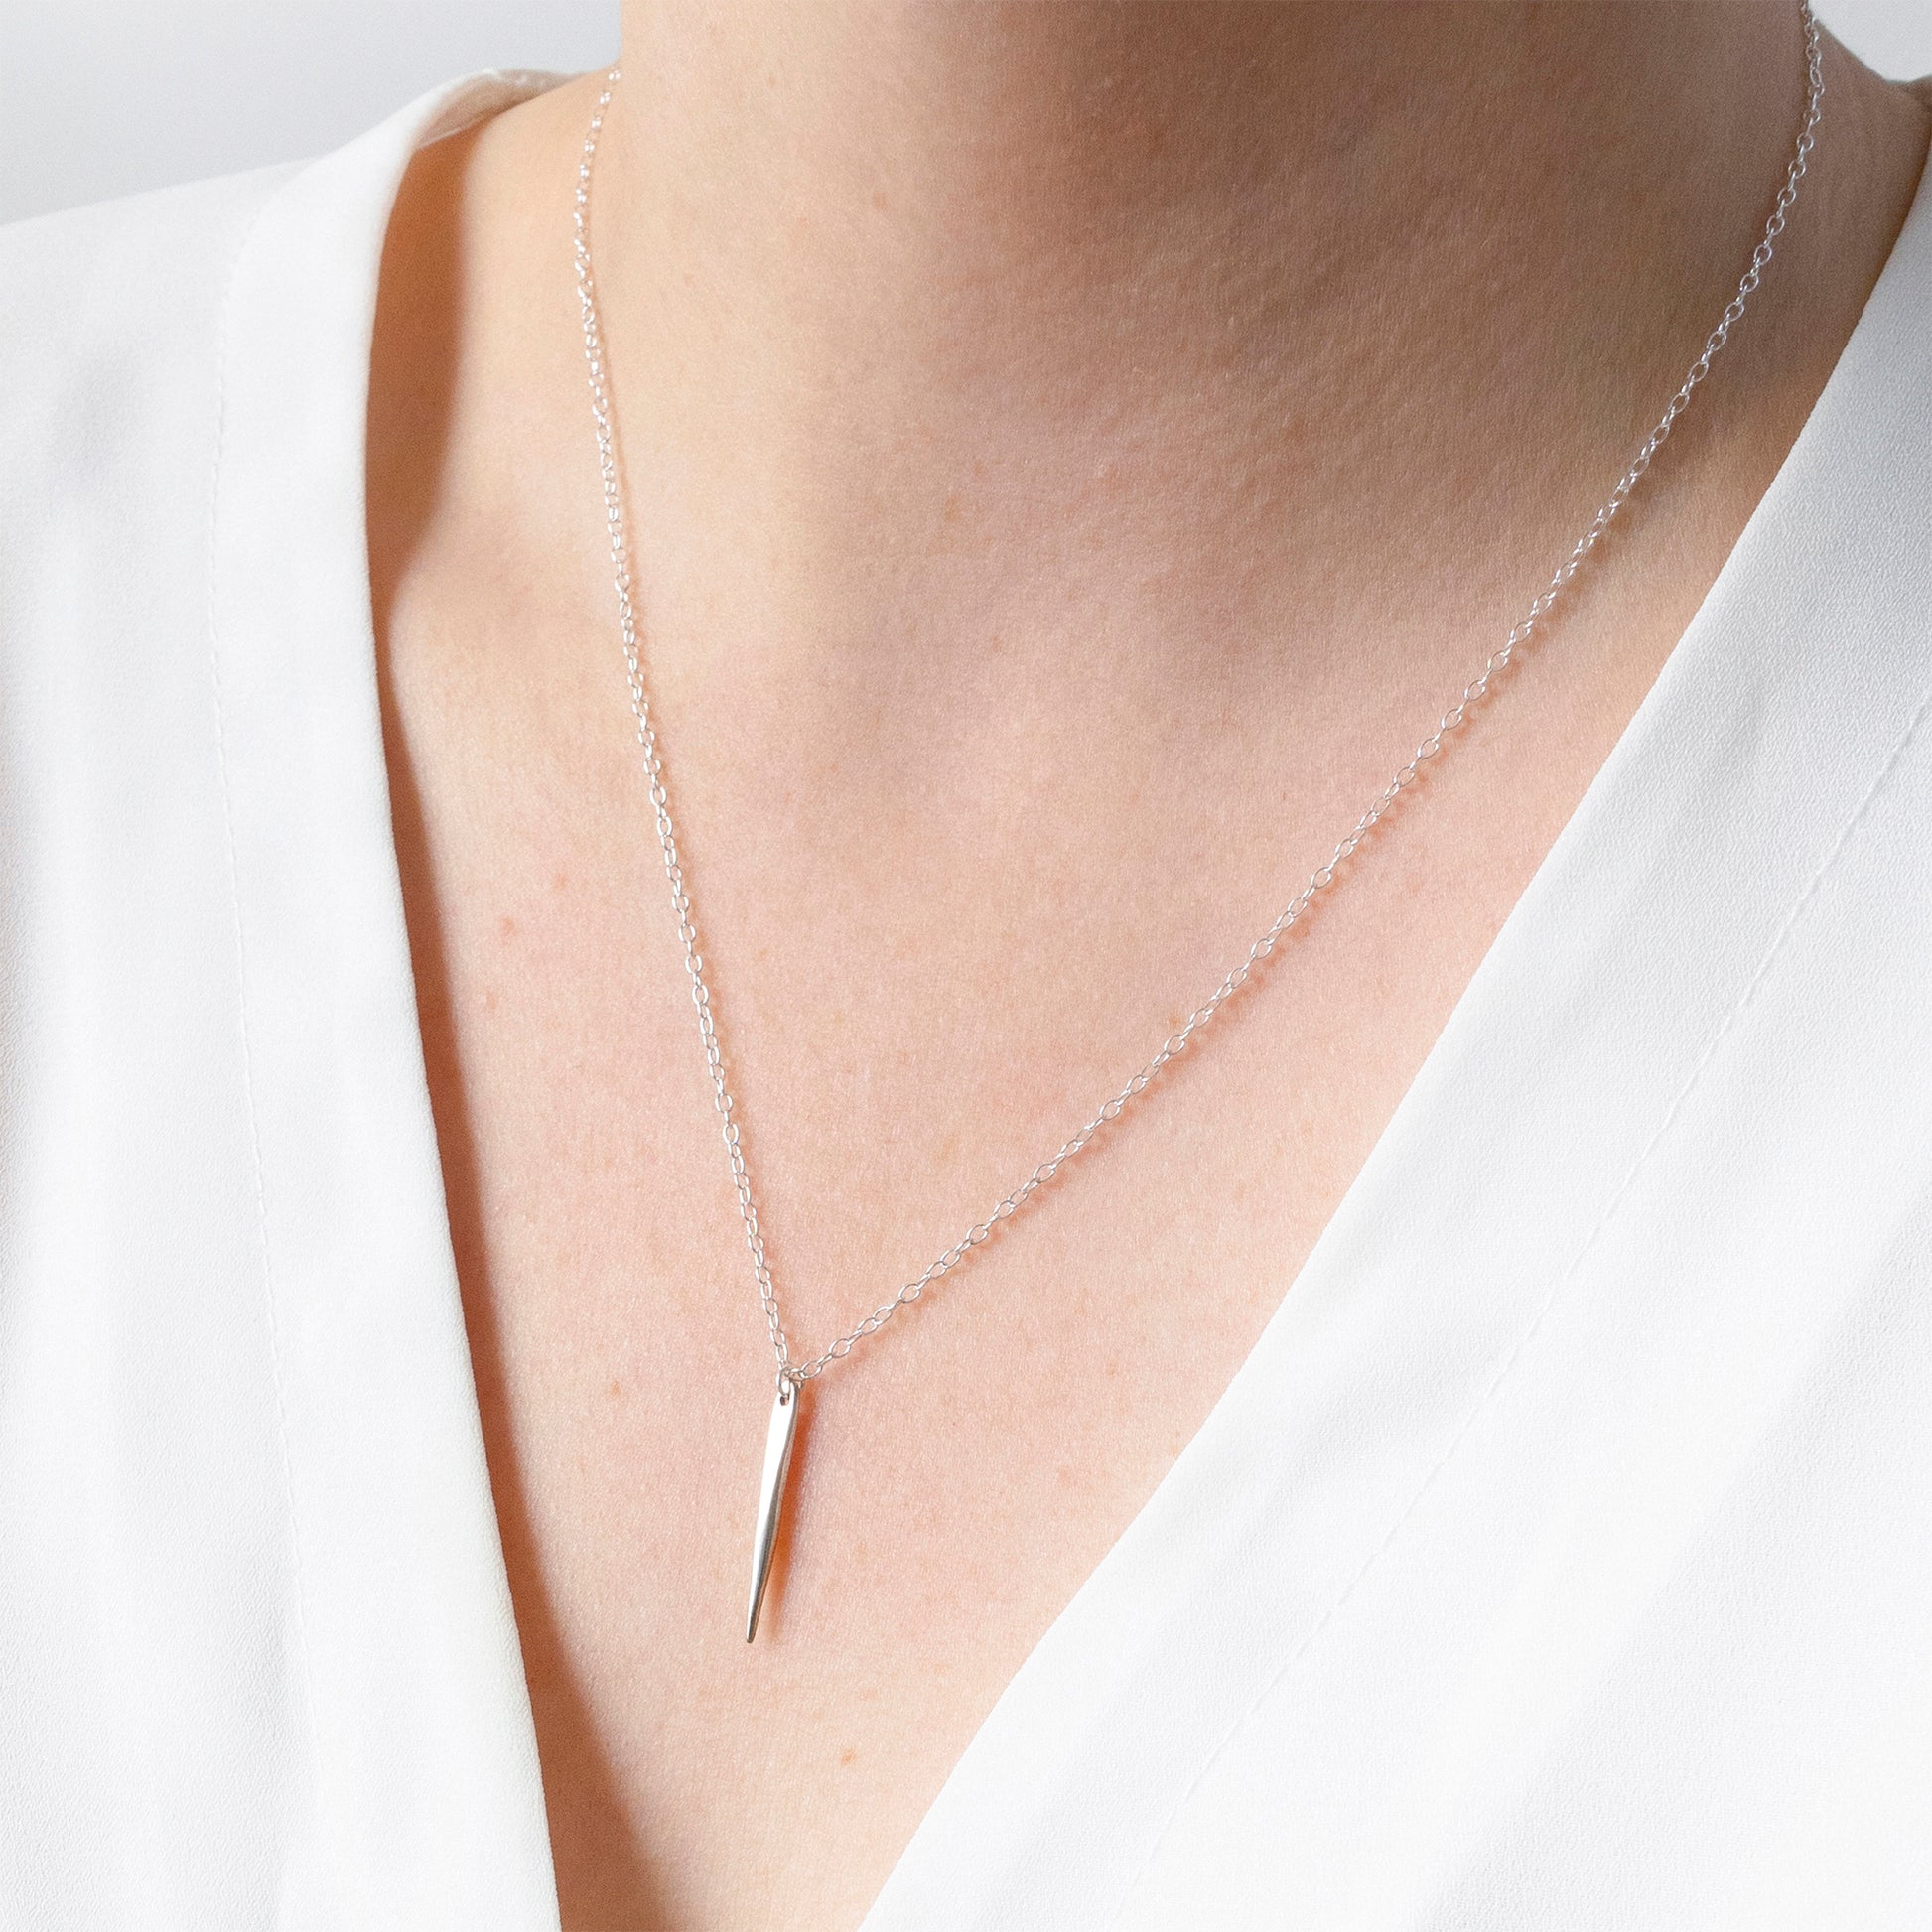 Silver Needle Necklace